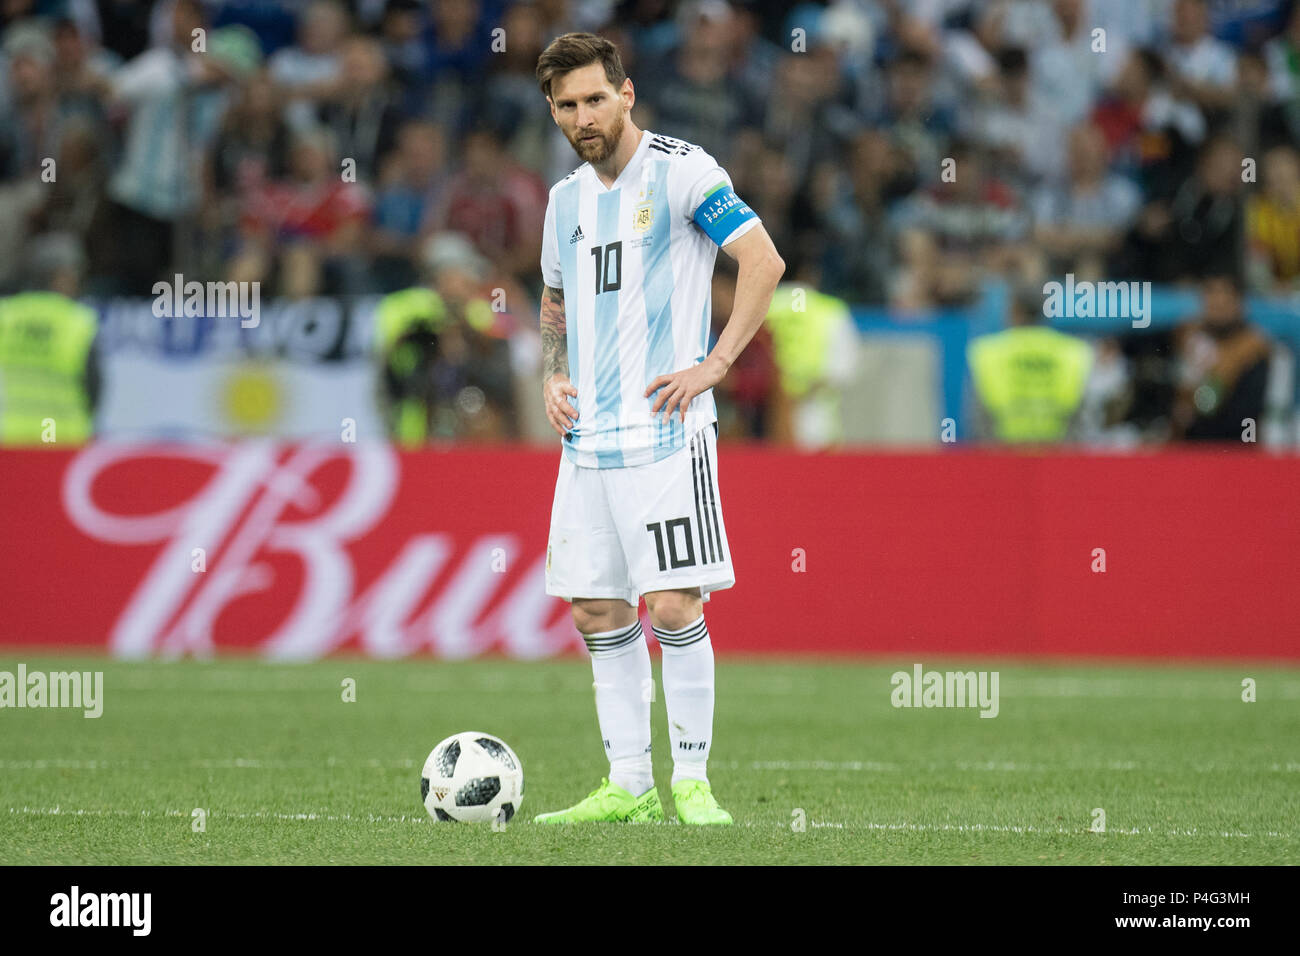 Nizhny Novgorod, Russia. 21 June 2018.  Lionel MESSI (ARG) is frosted after the goal to make it 1-0 for Croatia, disappointed, disappointed, disappointed, disappointed, sad, frustrated, frustrated, late-rate, full figure, Argentina (ARG) - Croatia (CRO) 0: 3, Preliminary round, Group D, Game 23, on 21.06.2018 in Moscow; Football World Cup 2018 in Russia from 14.06. - 15.07.2018. | usage worldwide Credit: dpa/Alamy Live News Credit: dpa picture alliance/Alamy Live News Stock Photo